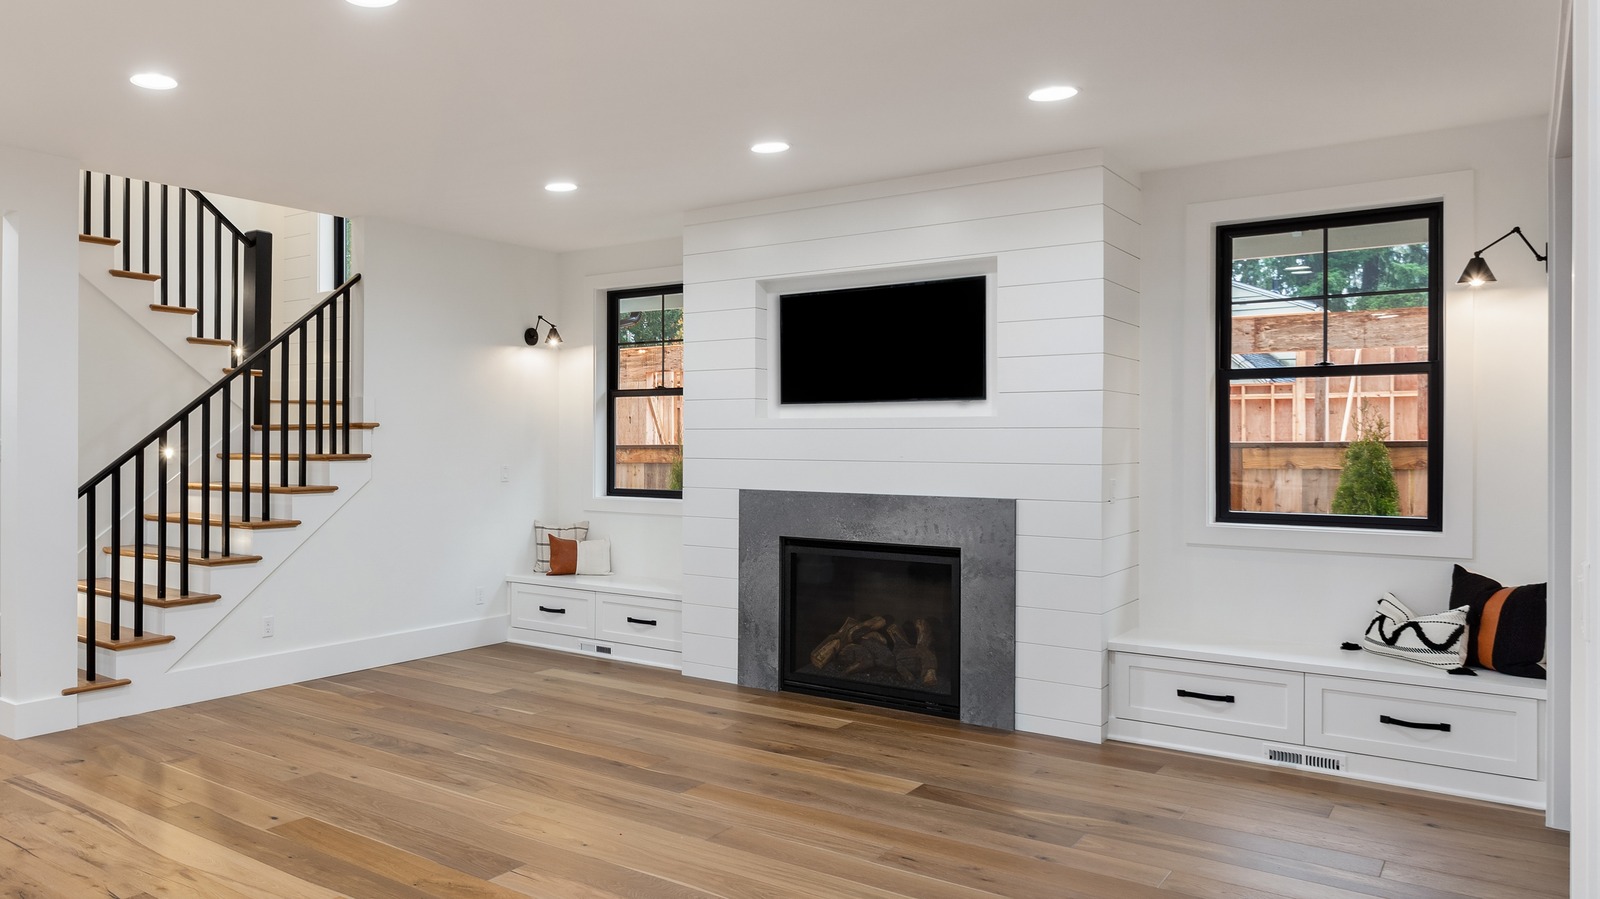 How to Stop Fireplace Drafts, How to Seal a Fireplace Opening